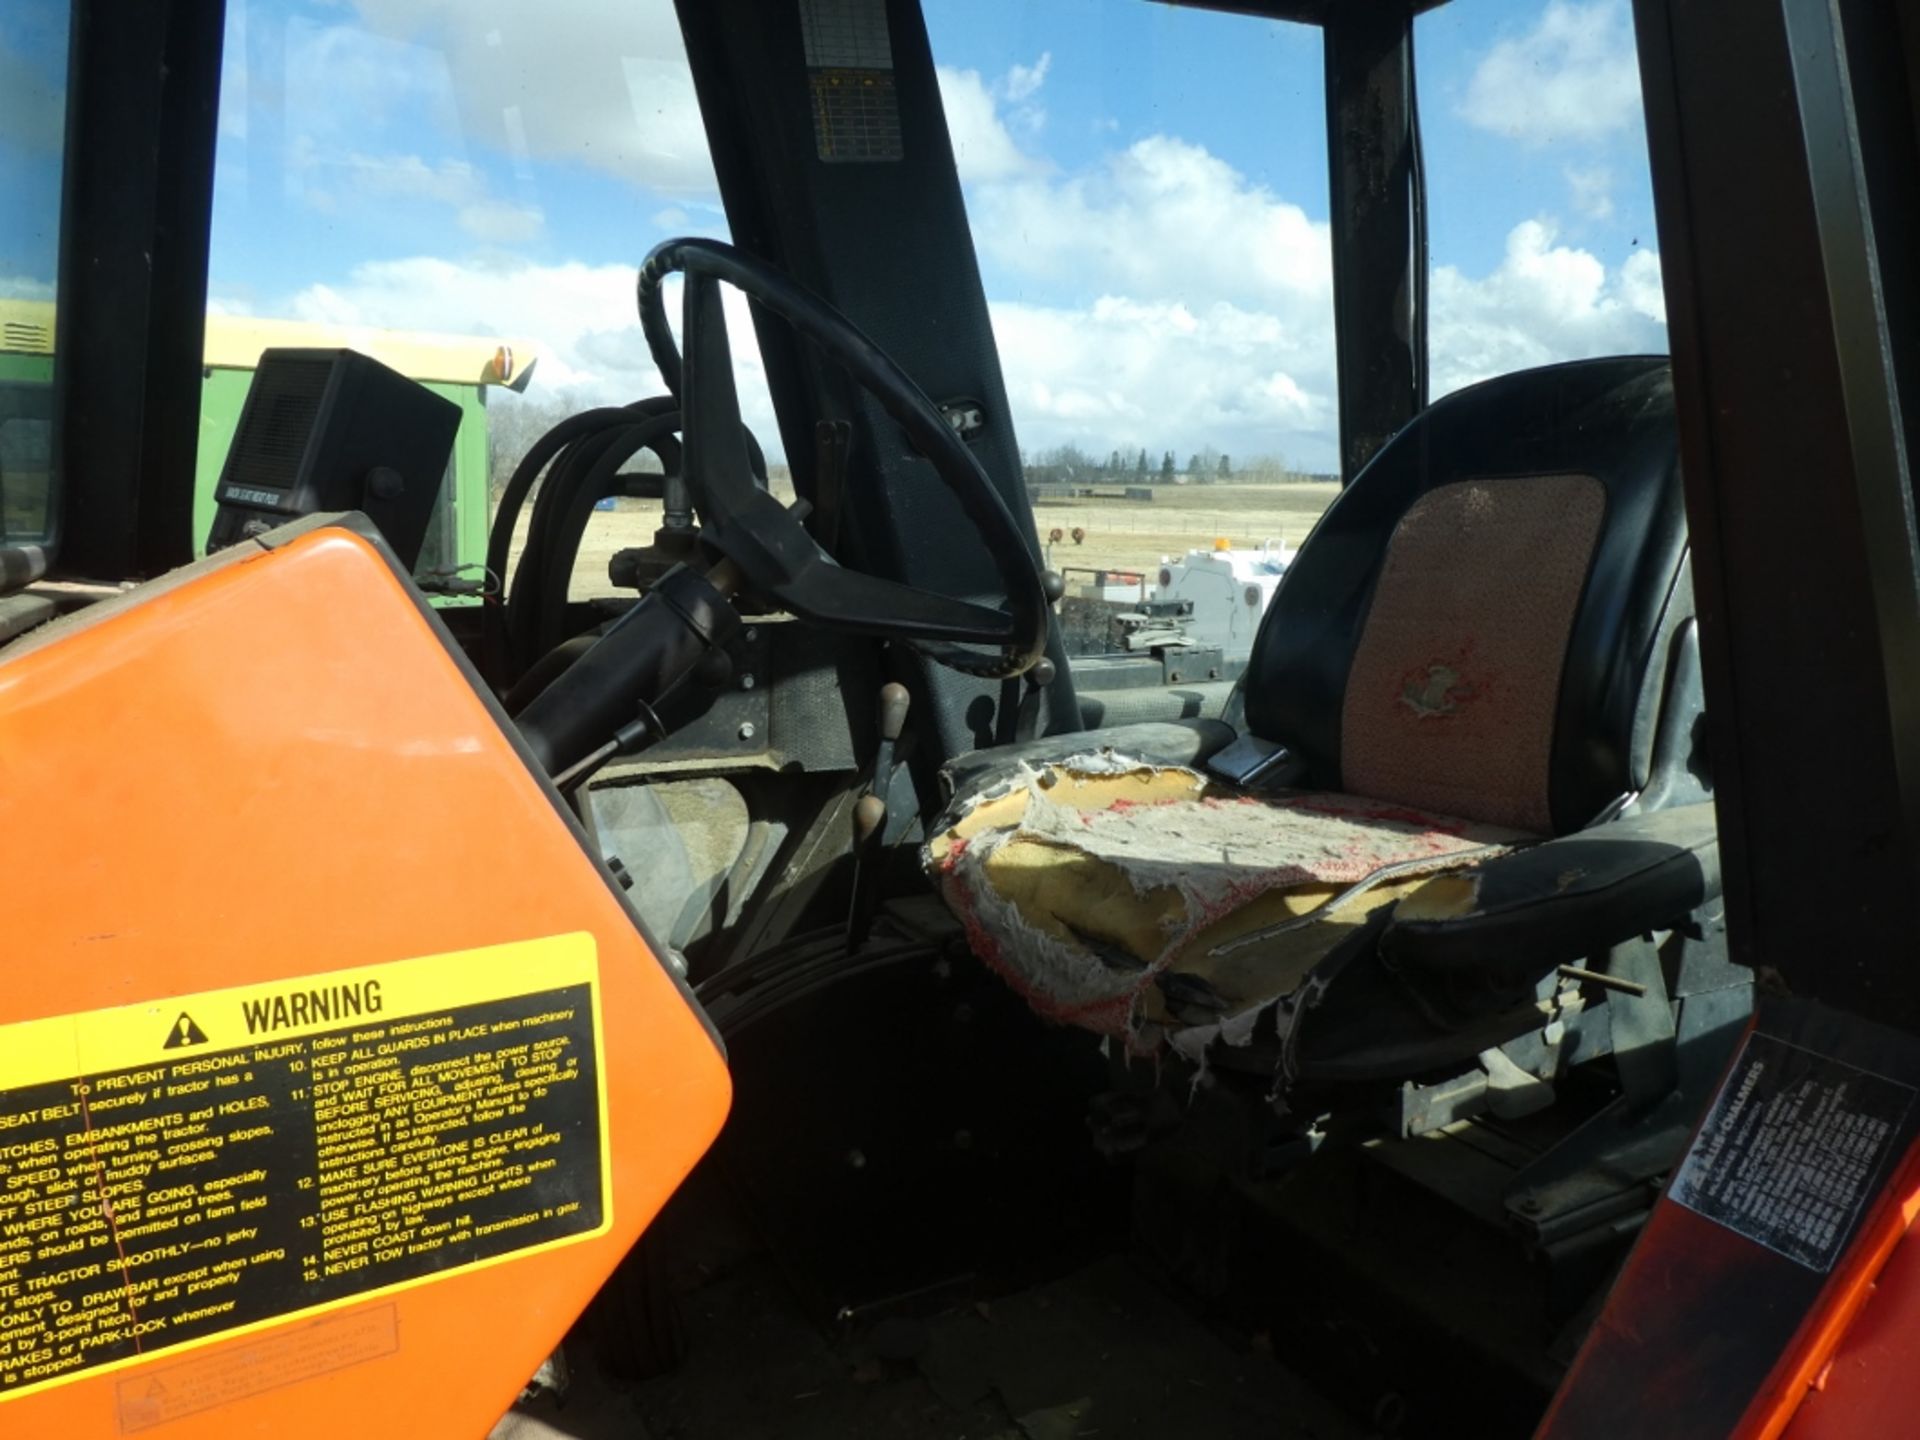 ALLIS CHALMERS 7010 TRACTOR W/ EZEE-ON 100 FRONT END LOADER W/ POWER SHIFT TRANSMISSION, 6700HR - Image 6 of 7